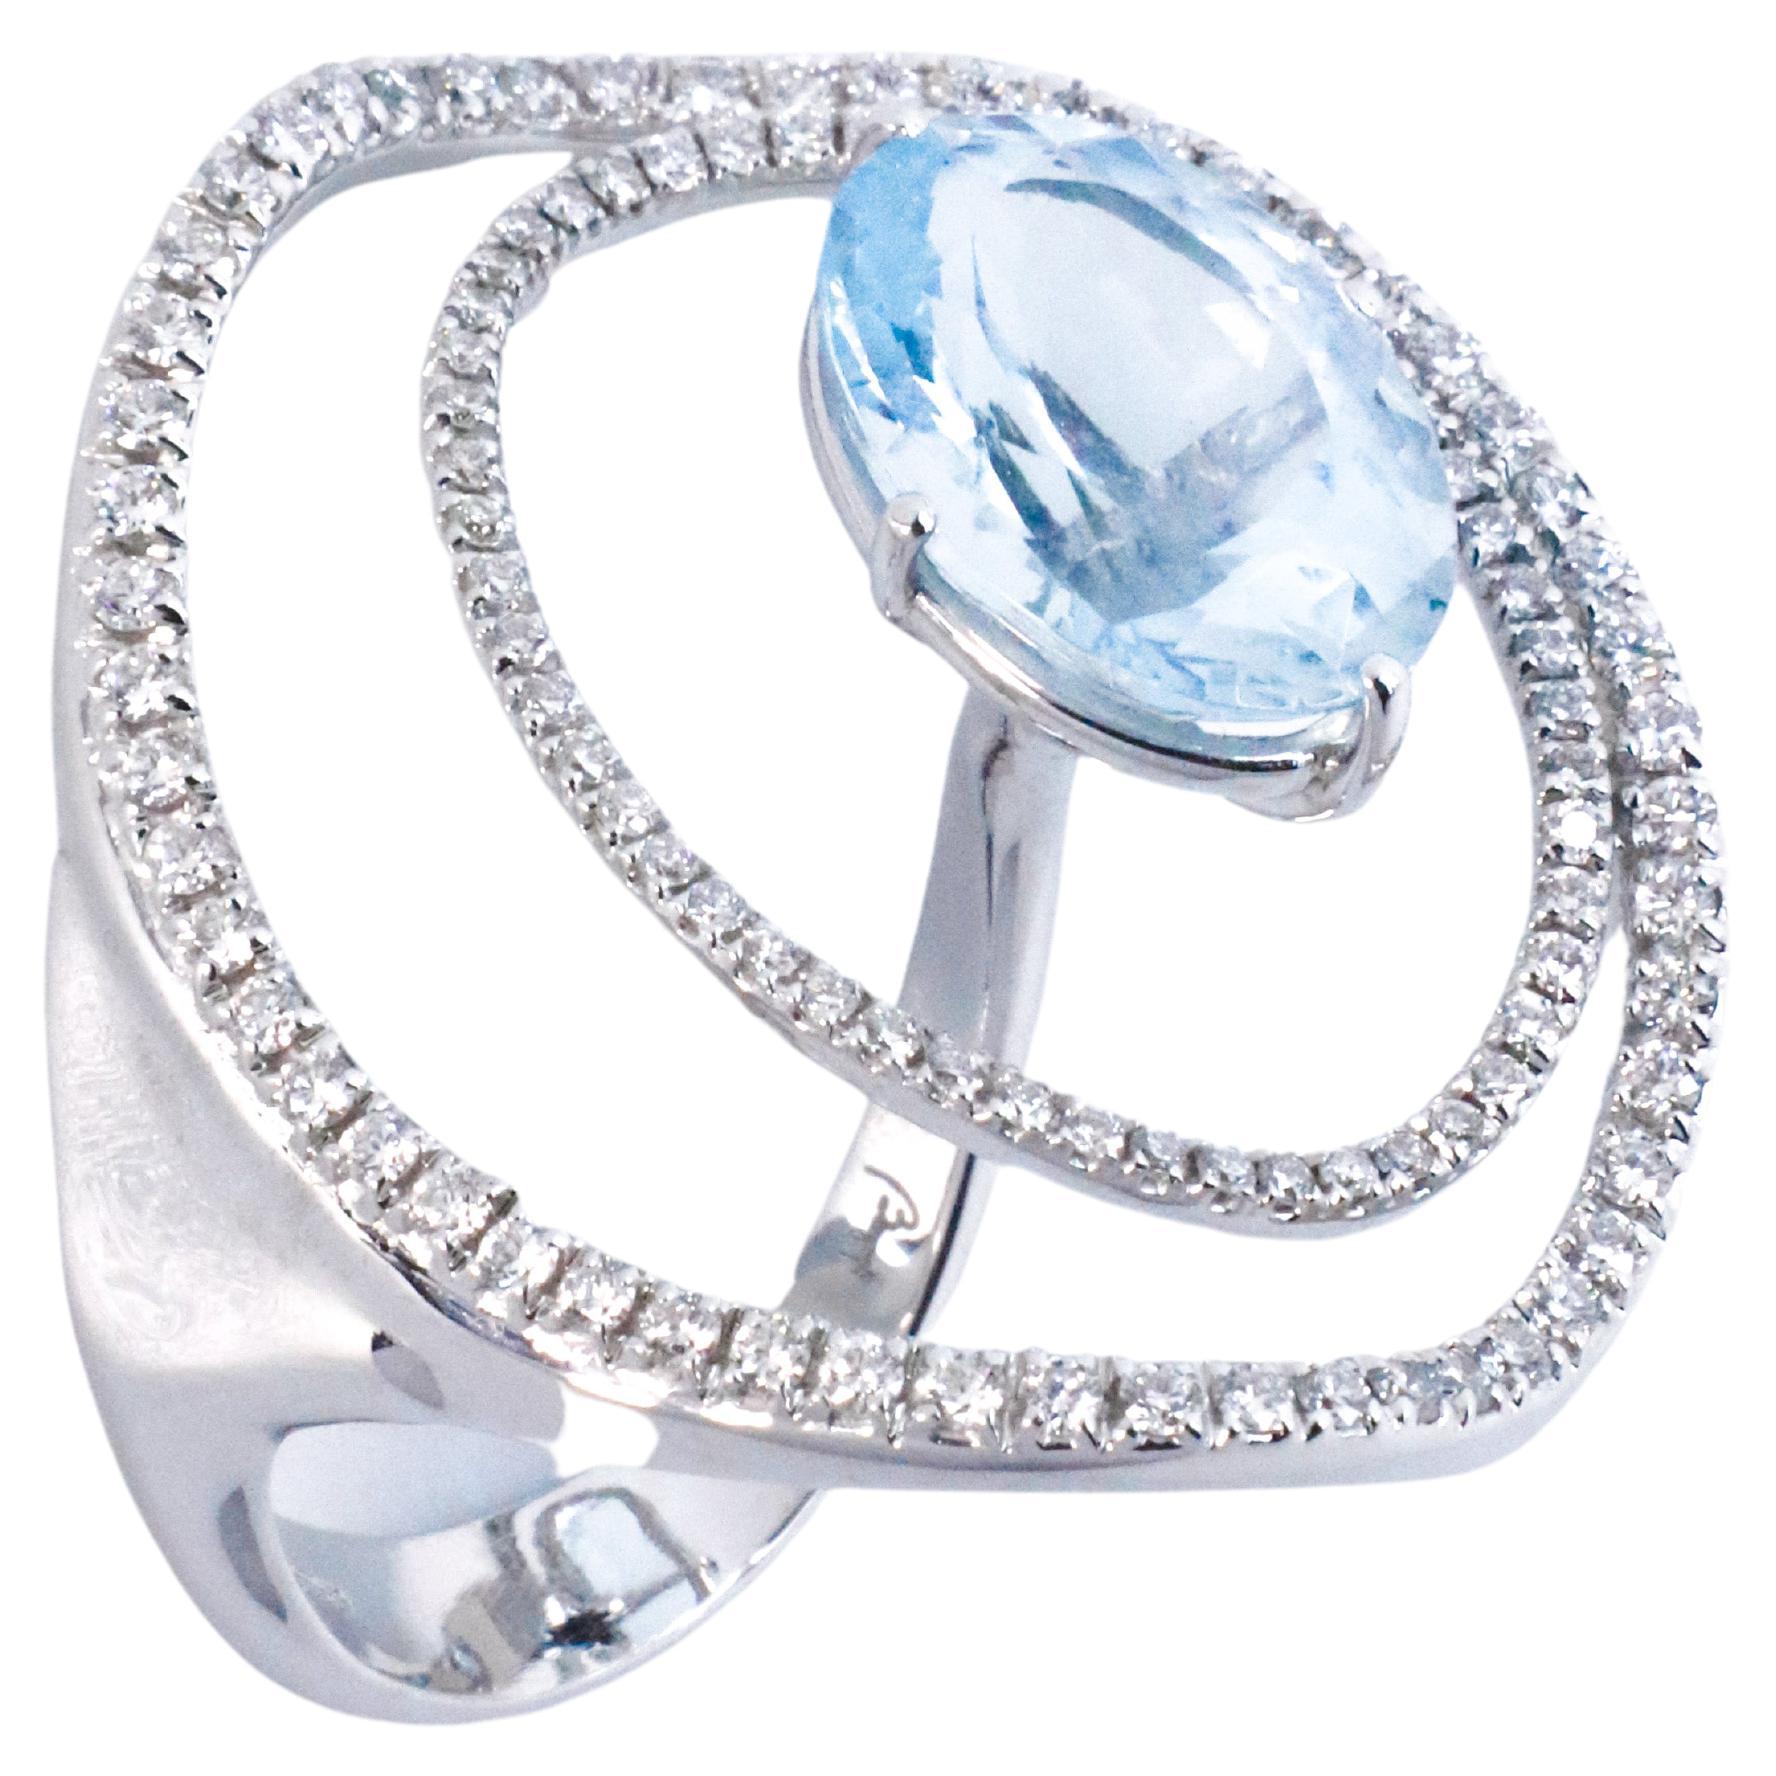 18k Gold Made in Italy Aquamarine Diamond Innovatively Worn Cosmic Cocktail Ring